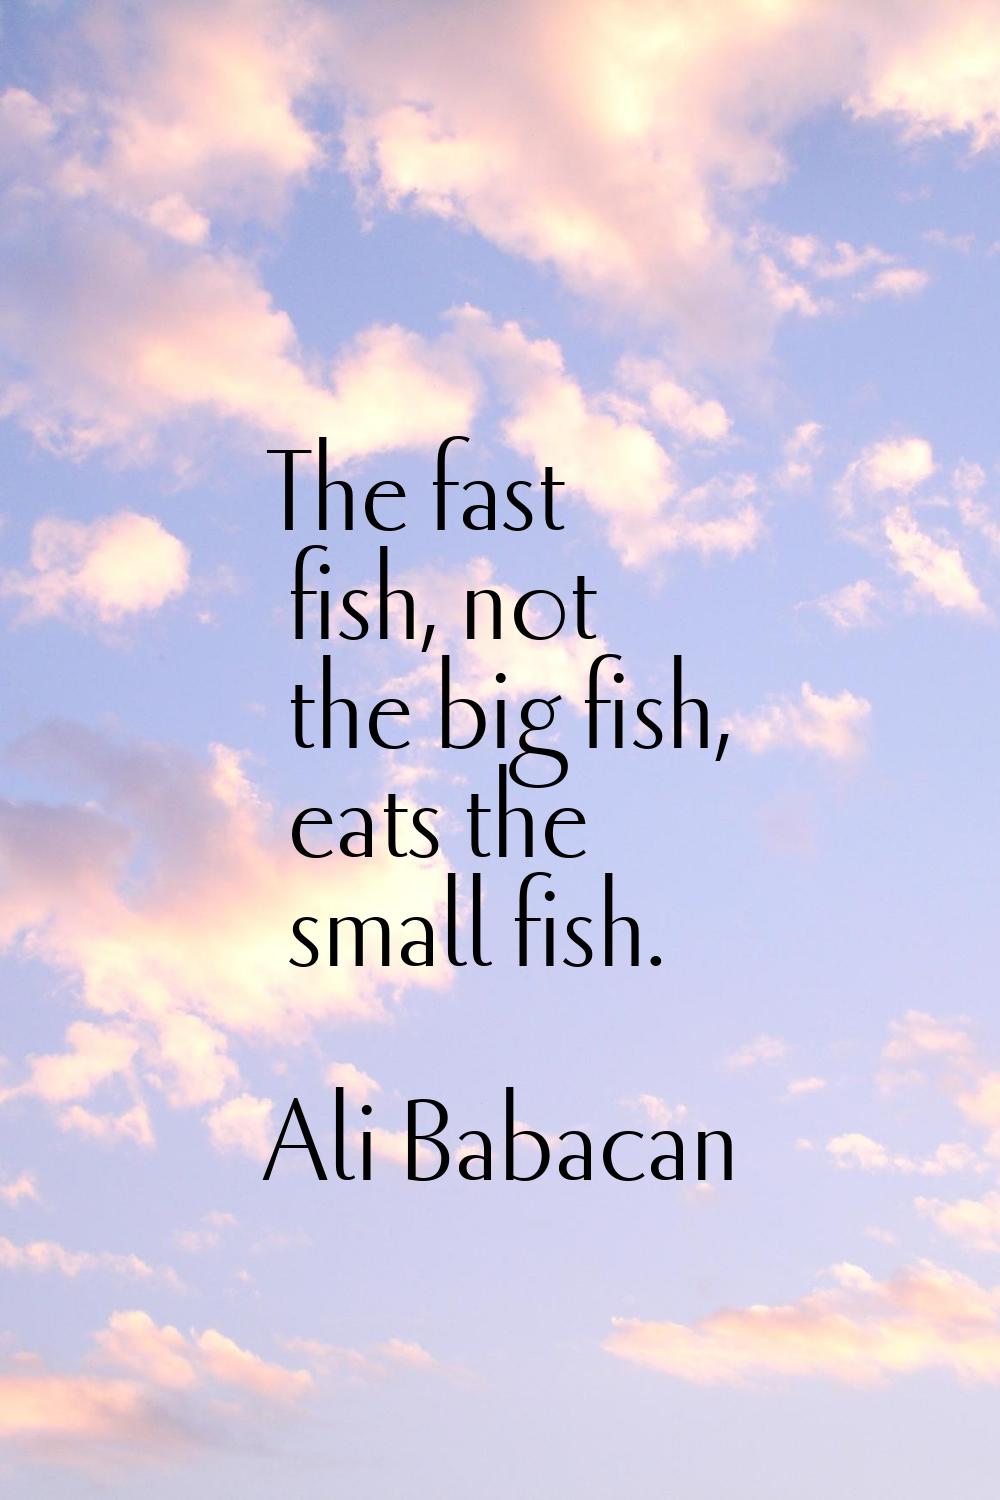 The fast fish, not the big fish, eats the small fish.